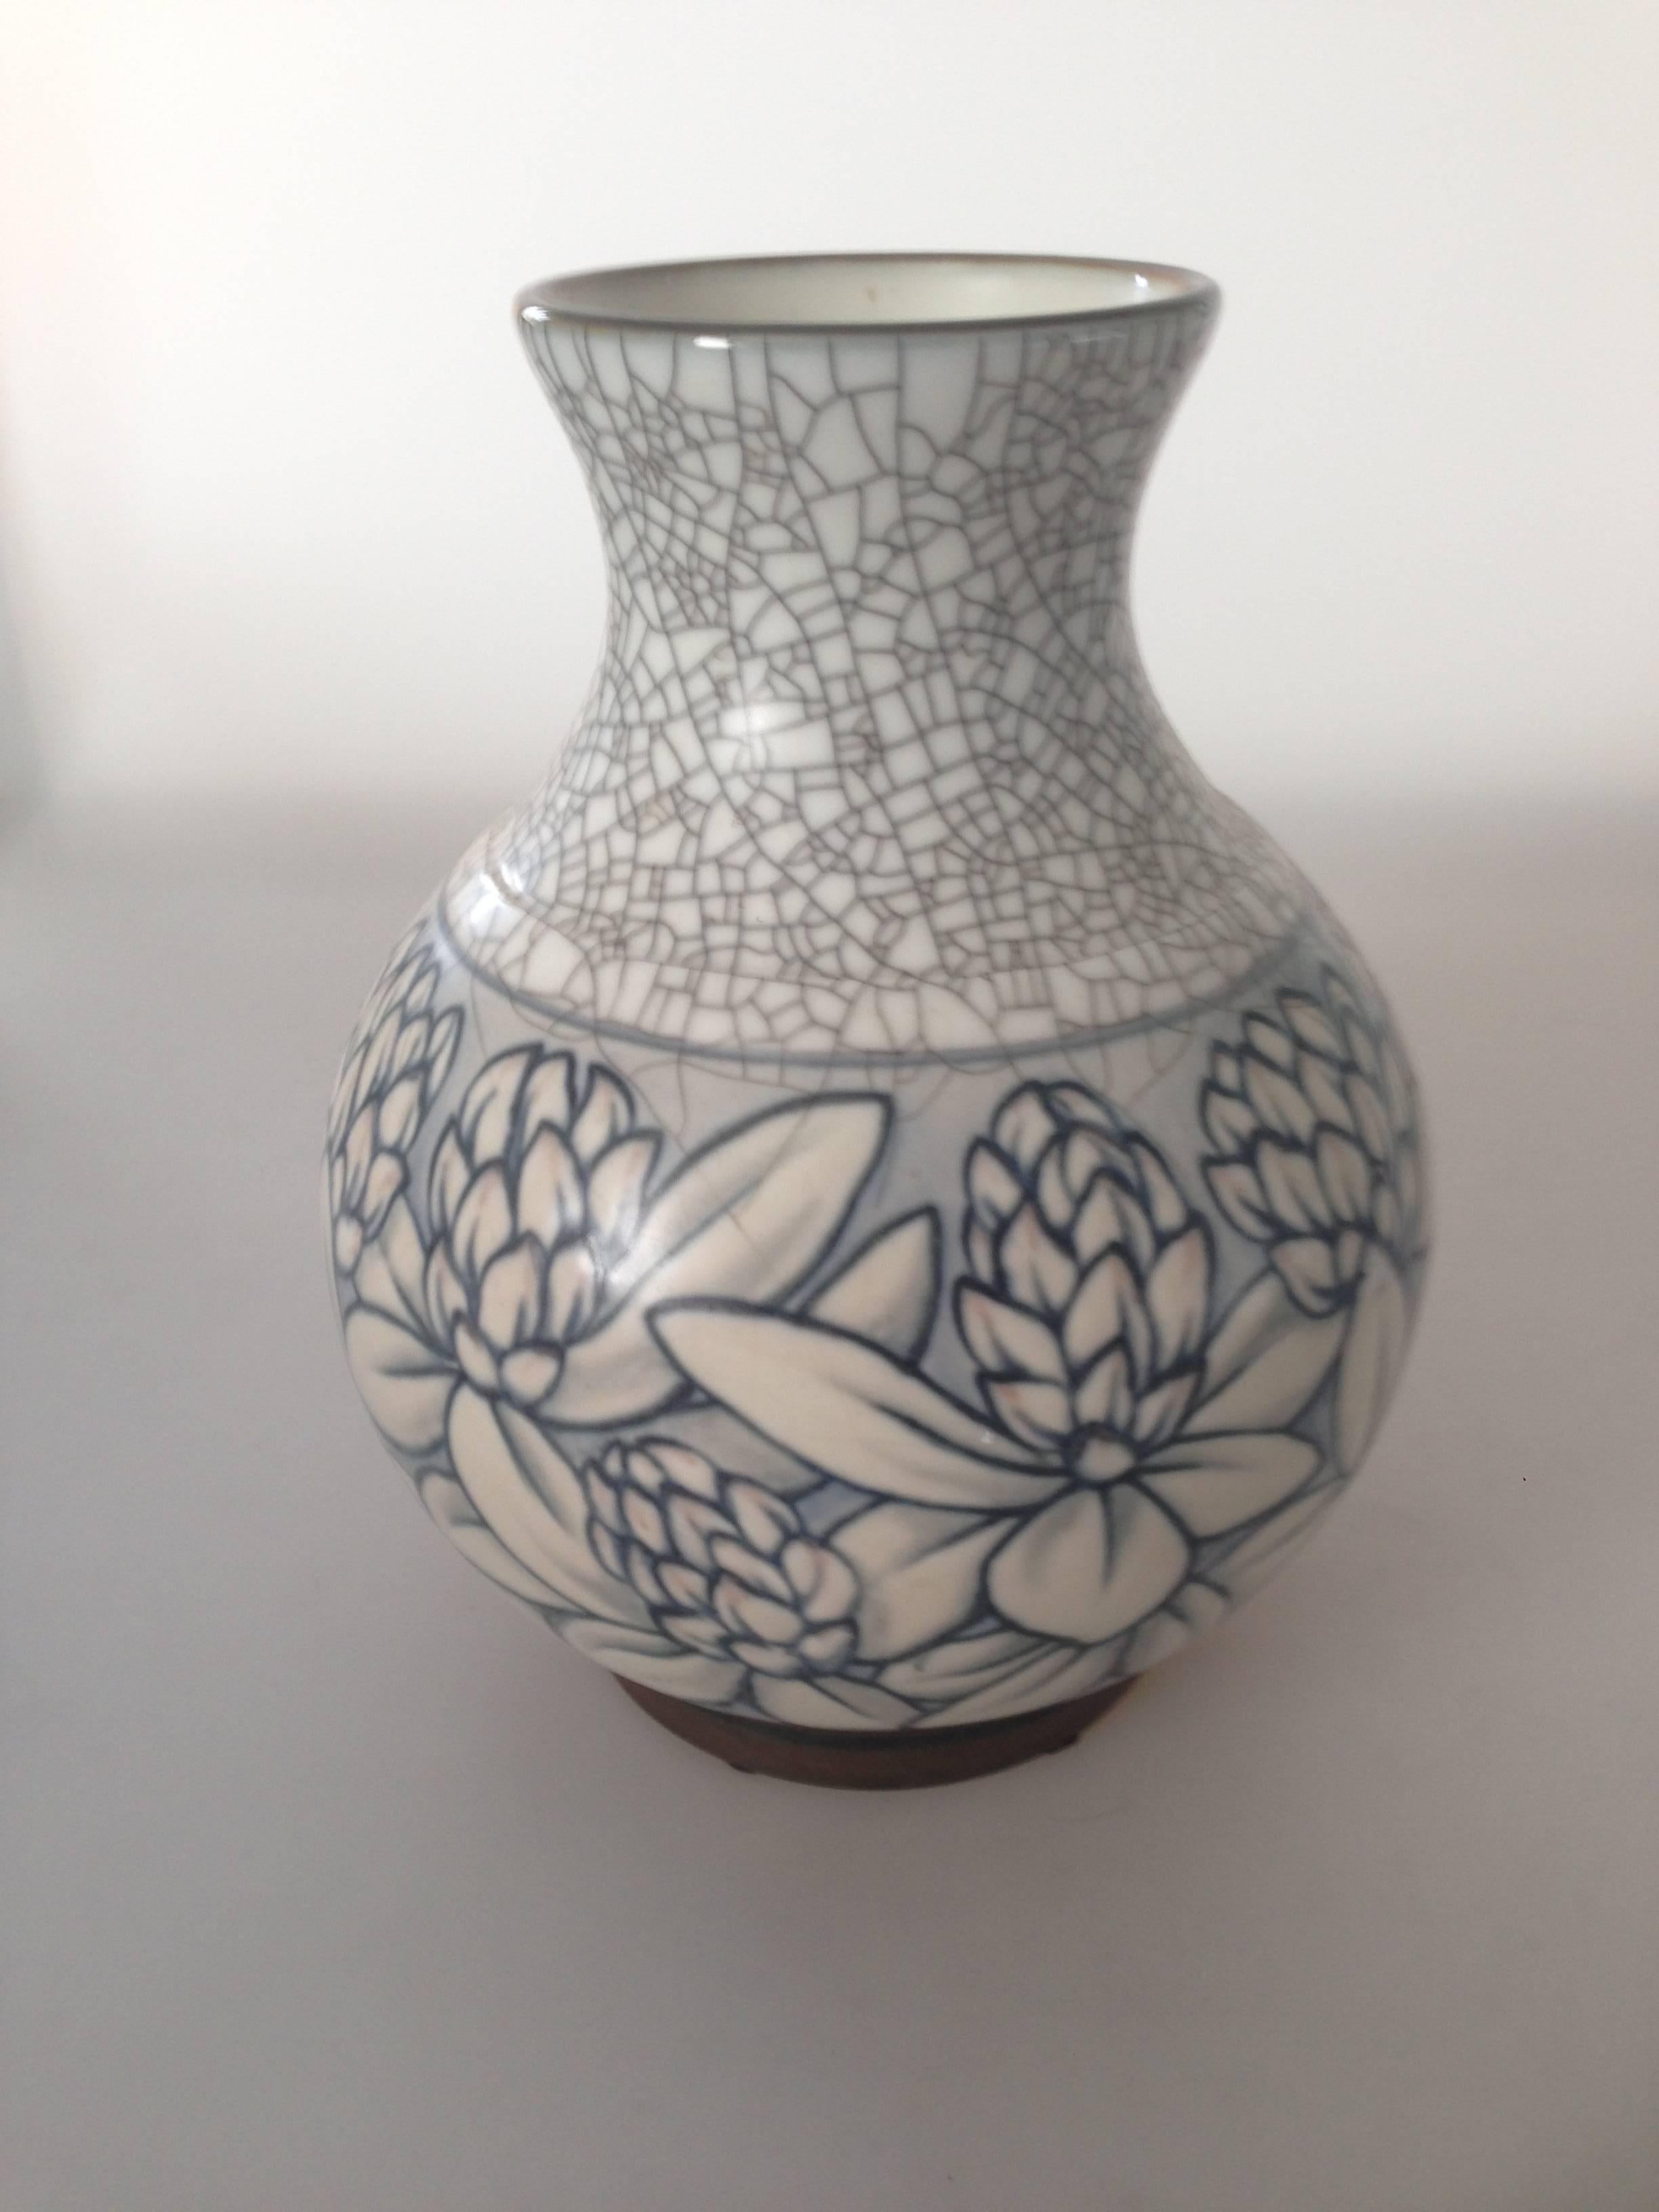 Bing & Grondahl Art Nouveau vase by Effie Hegermann-Lindencrone #2284. Measures 23.2cm and is in good condition.